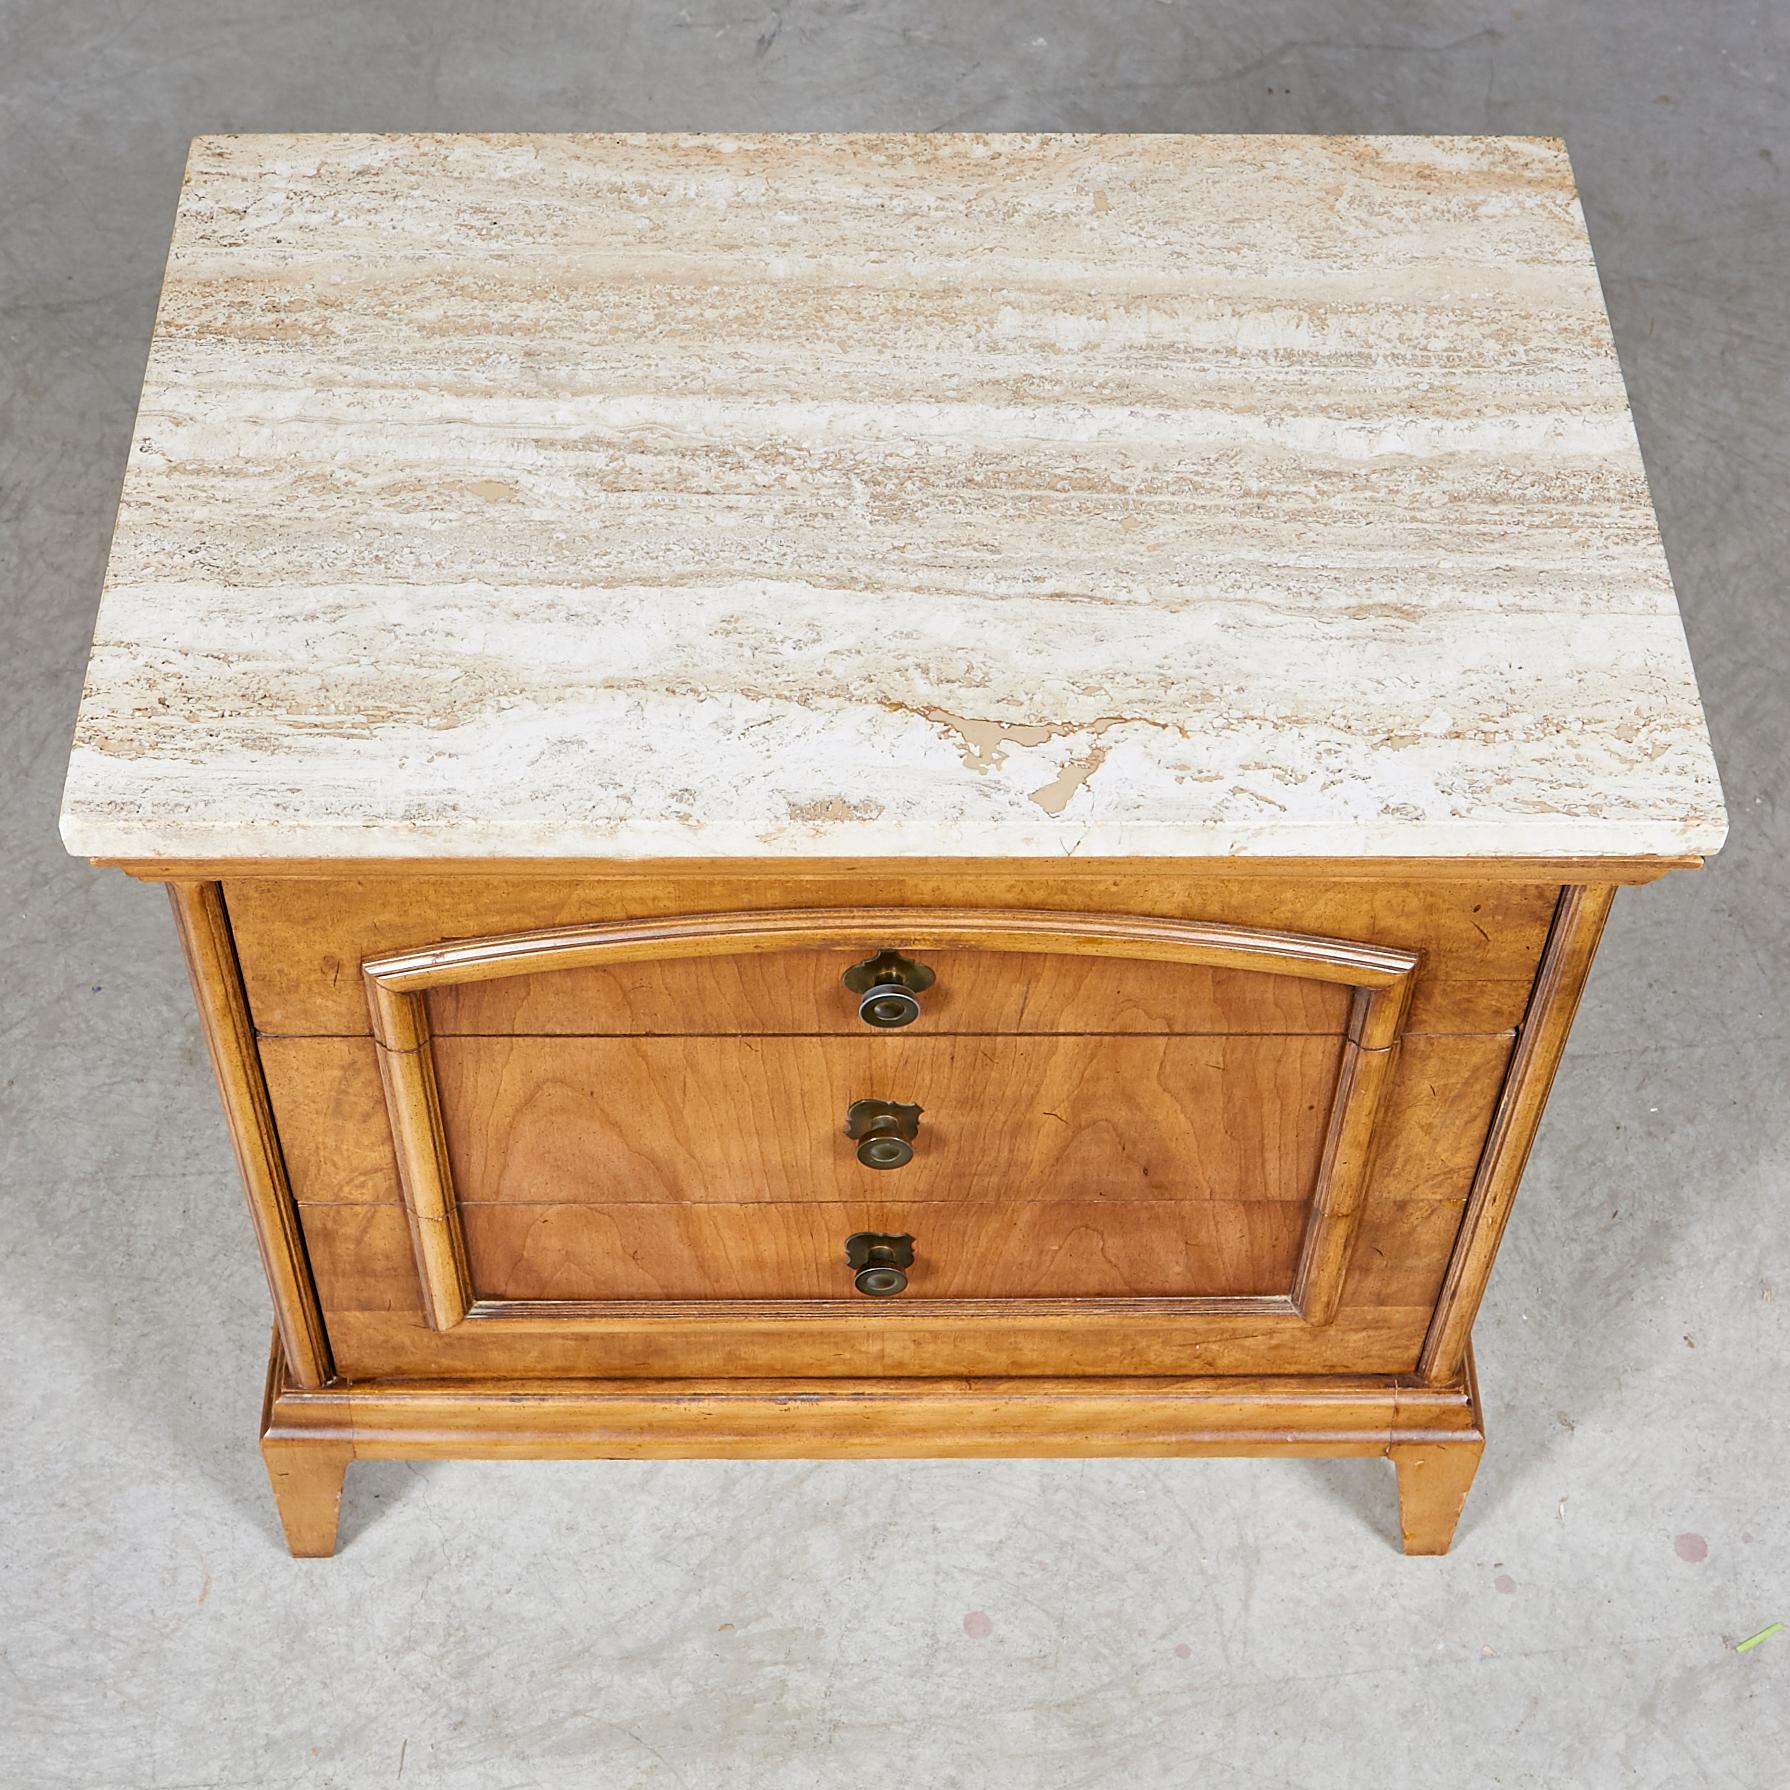 Vintage 1960s single fruitwood nightstand with an Italian travertine top. The top is not attached to the base. The nightstand has three drawers for storage. Newly refinished condition. No maker's mark.